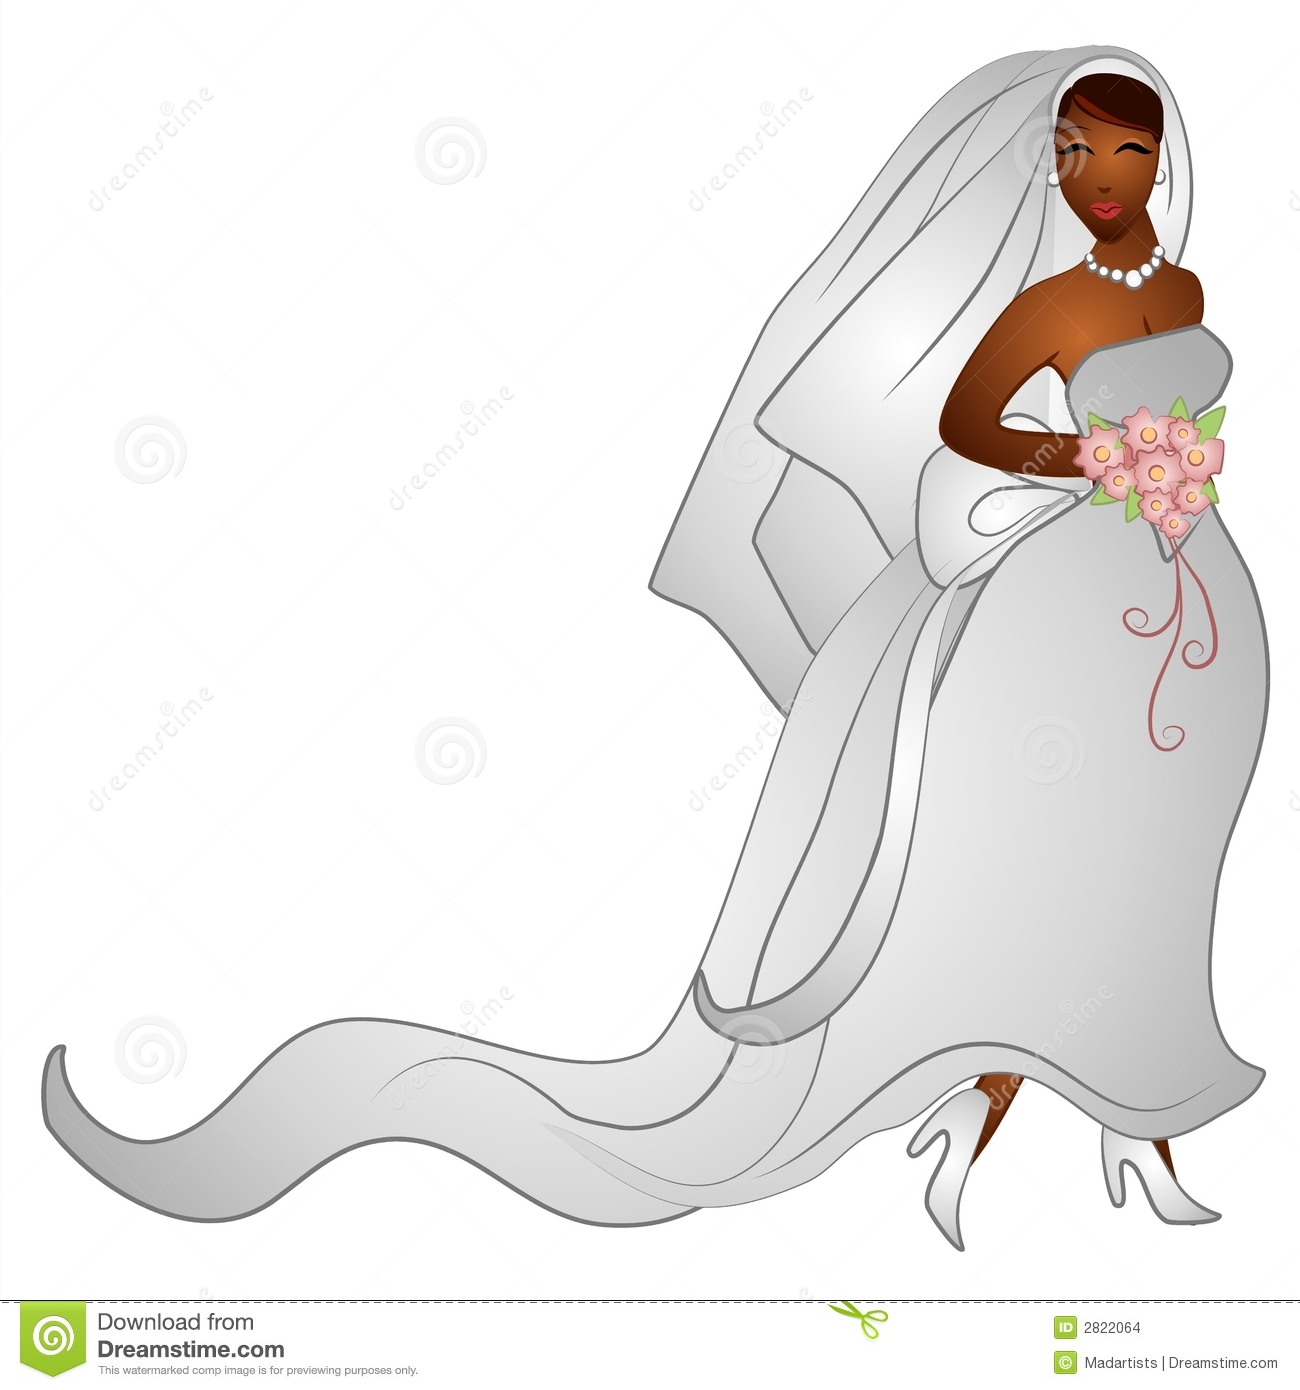 Clip Art Illustration Of A Beautiful African American Bride In Her